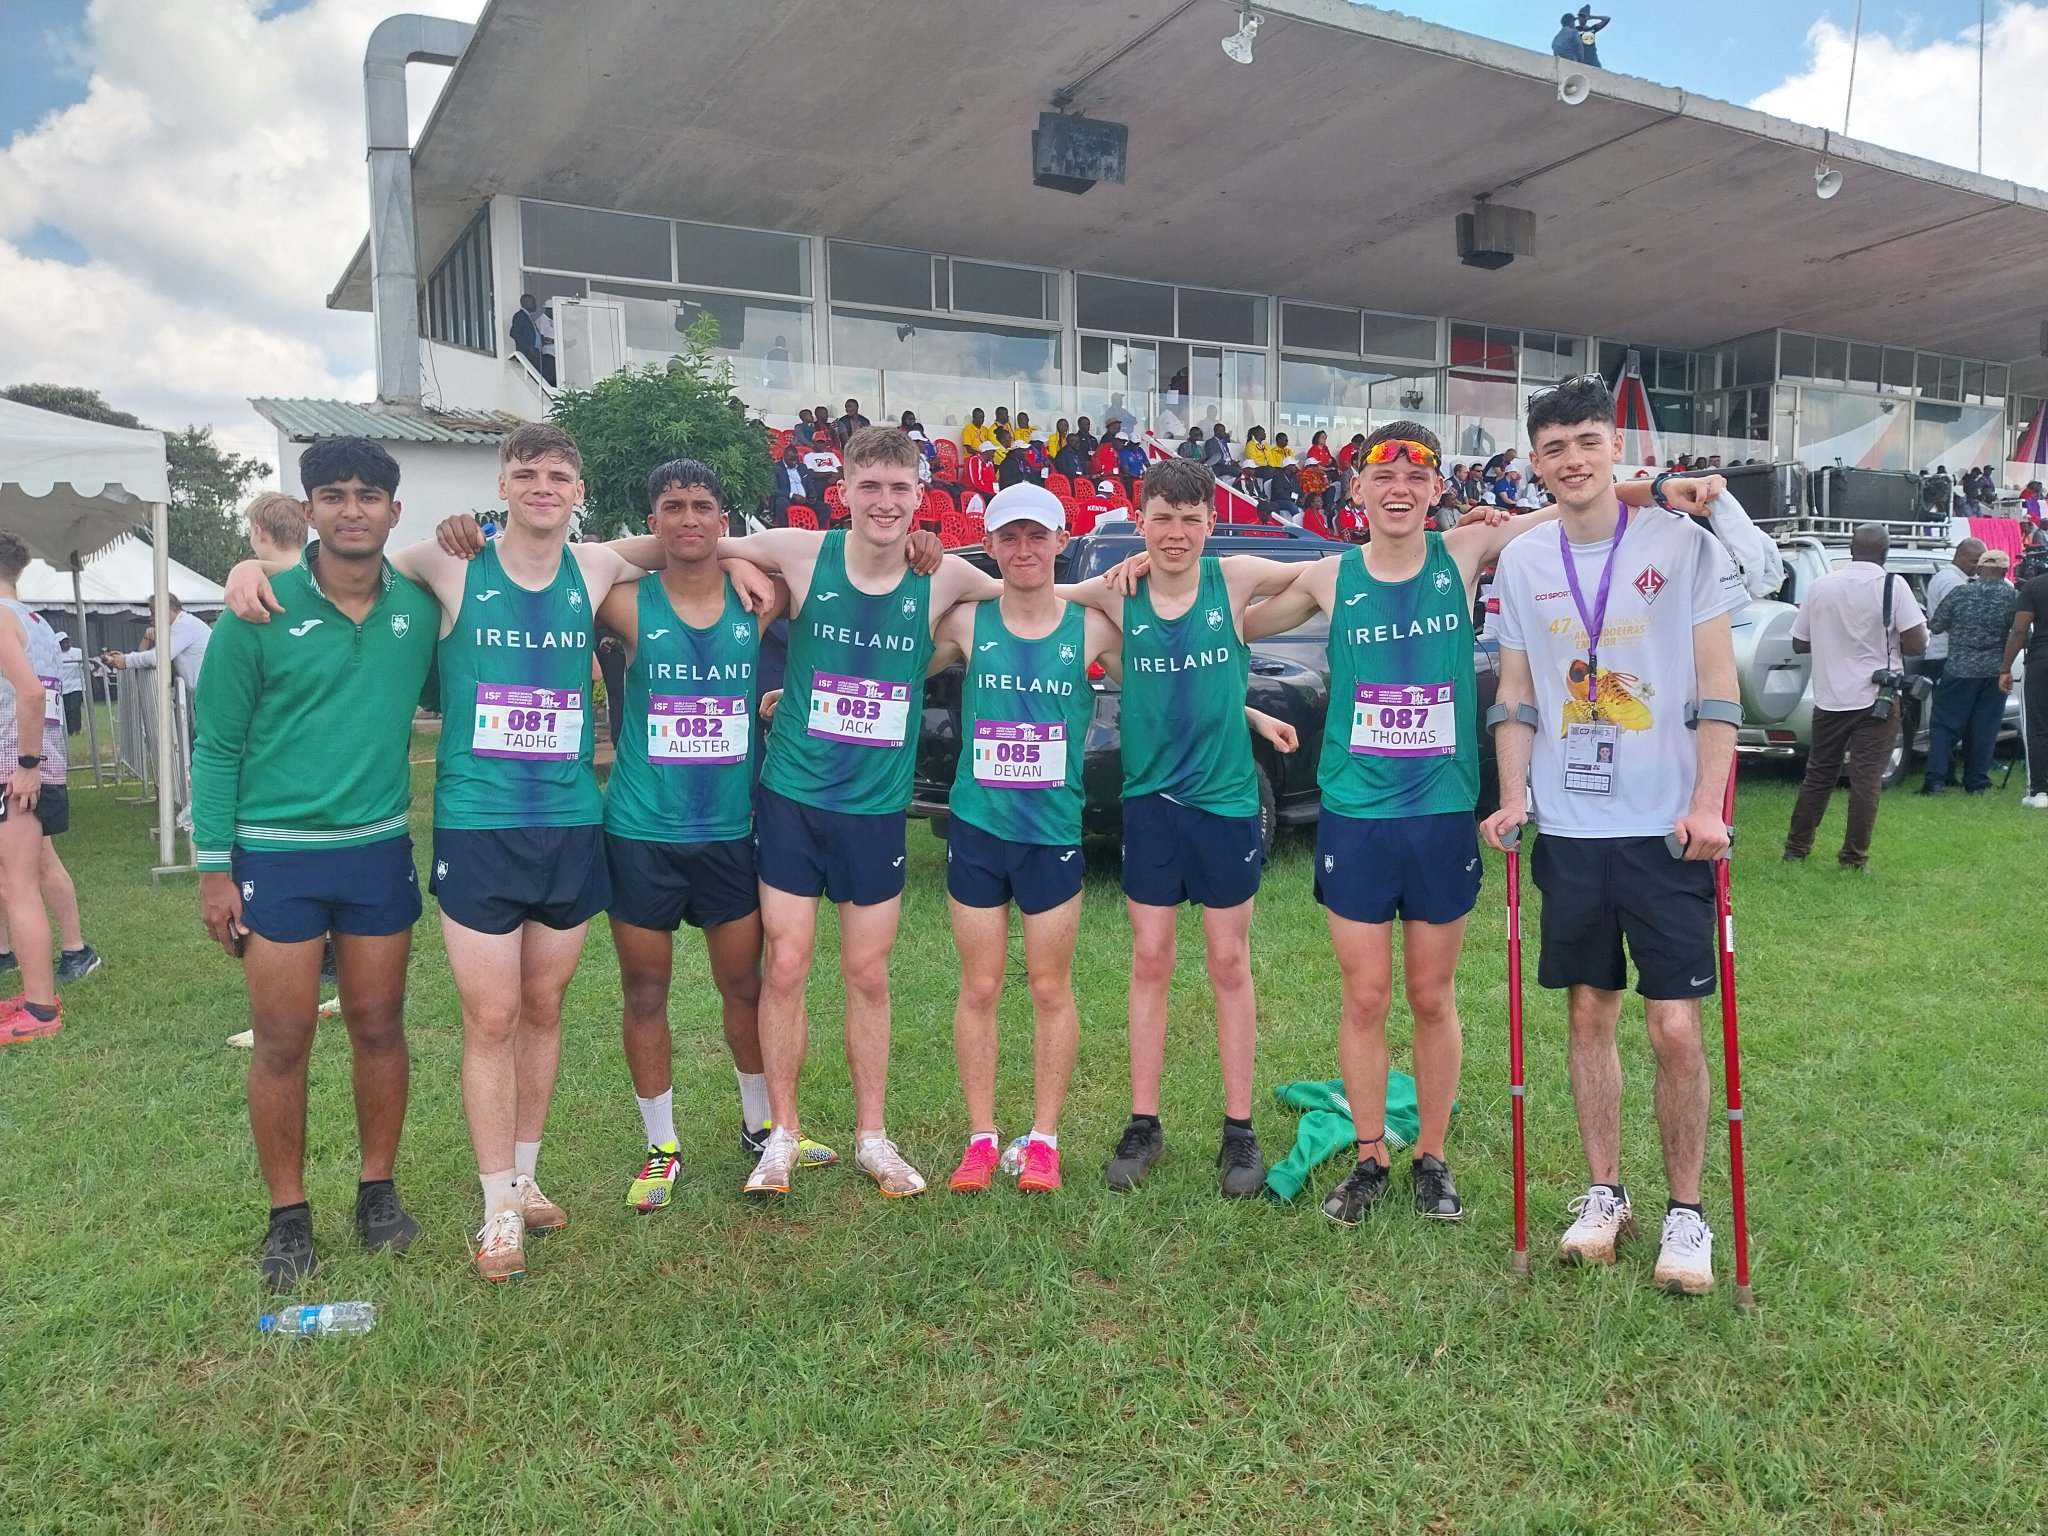 St. Aidan’s secure 8th place in World Schools Finals